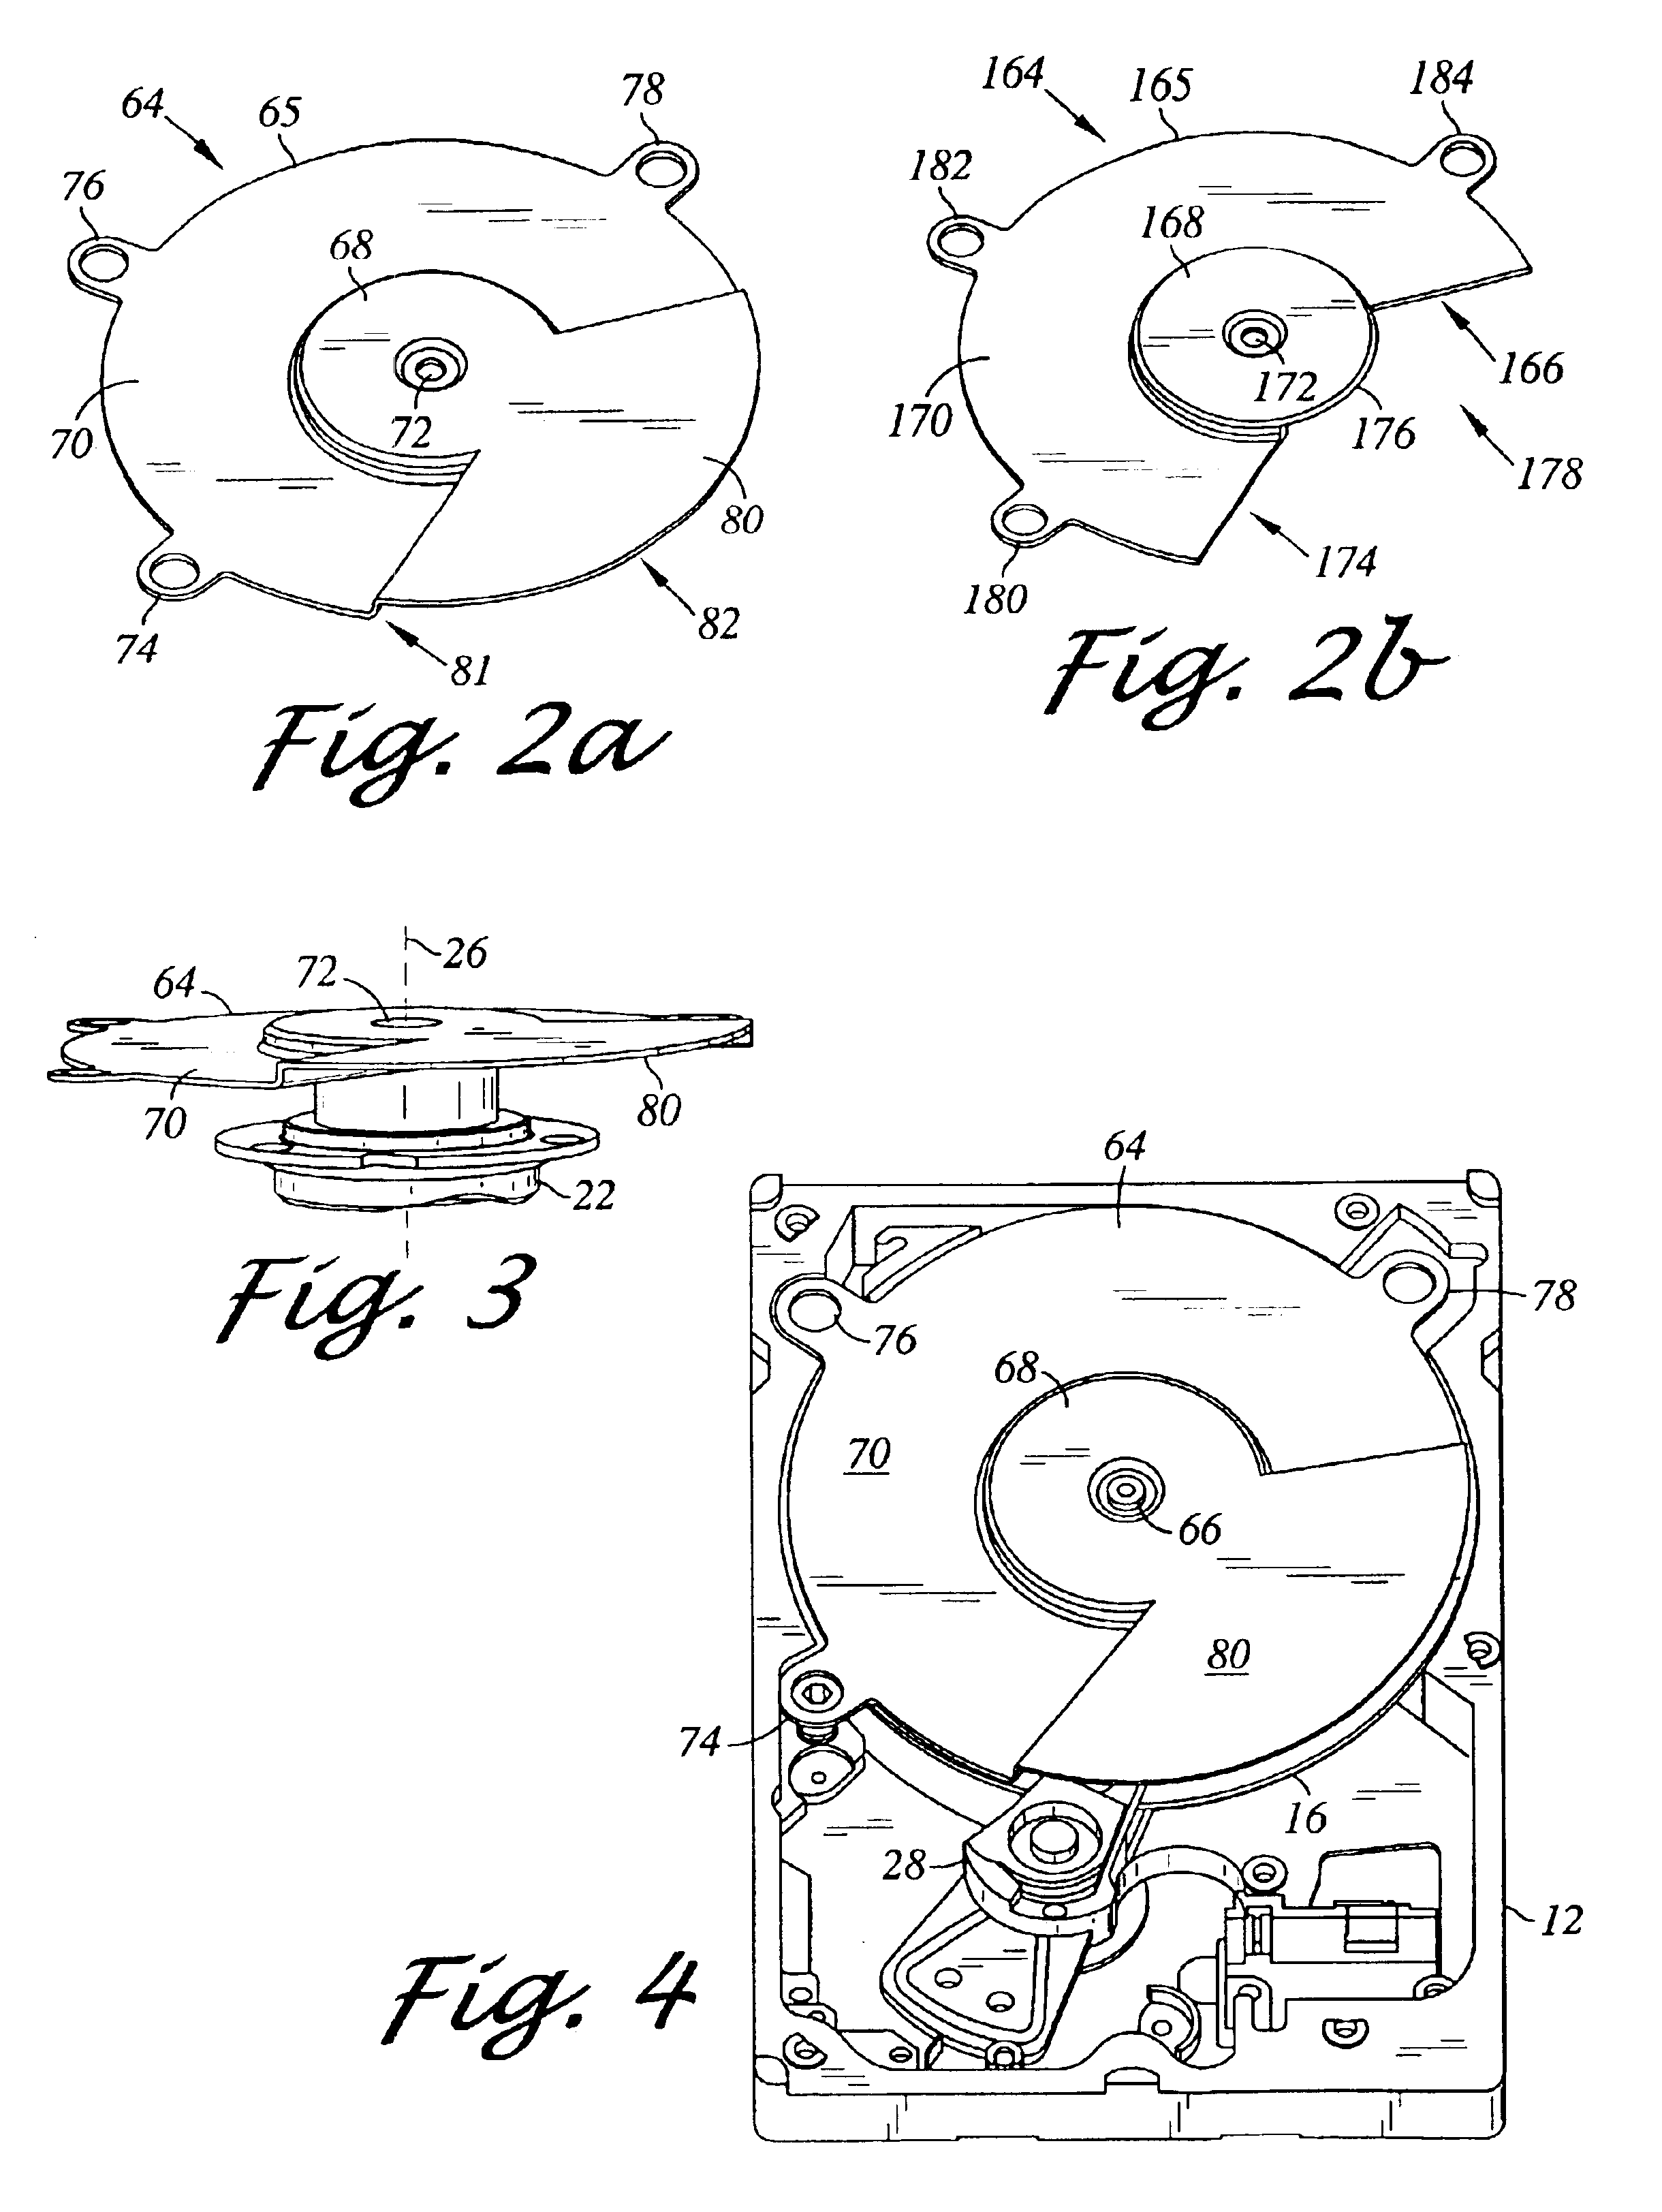 Disk drive having a disk plate body attached to a fixed spindle shaft of a spindle motor